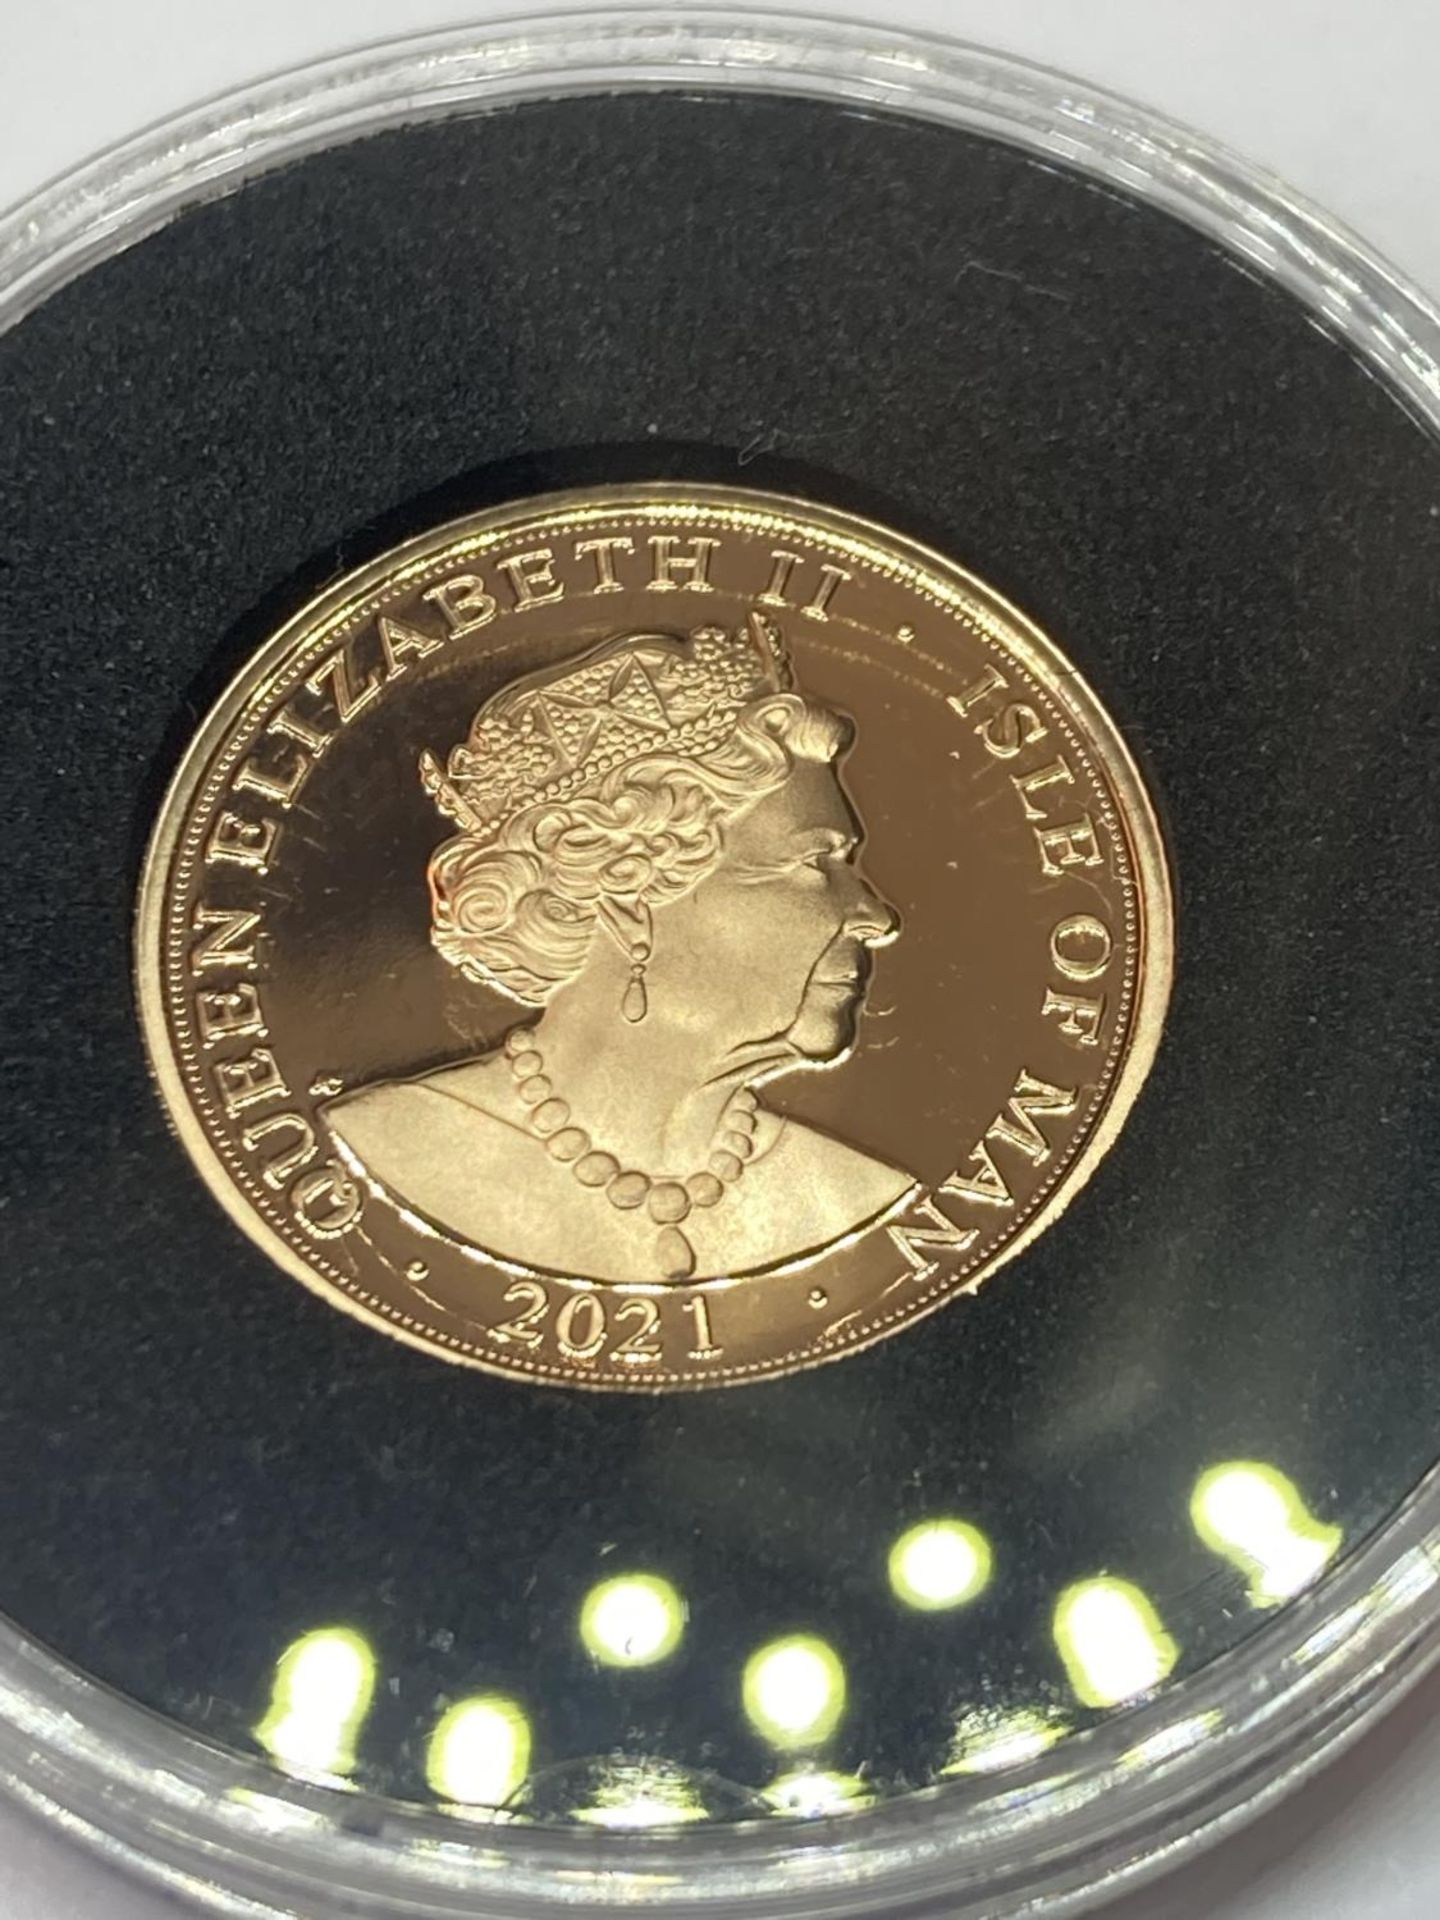 A 2021 QE2 95TH BIRTHDAY ISLE OF MAN GOLD PROOF SOVEREIGN LIMITED EDITION NUMBER 540 OF 995 - Image 3 of 4